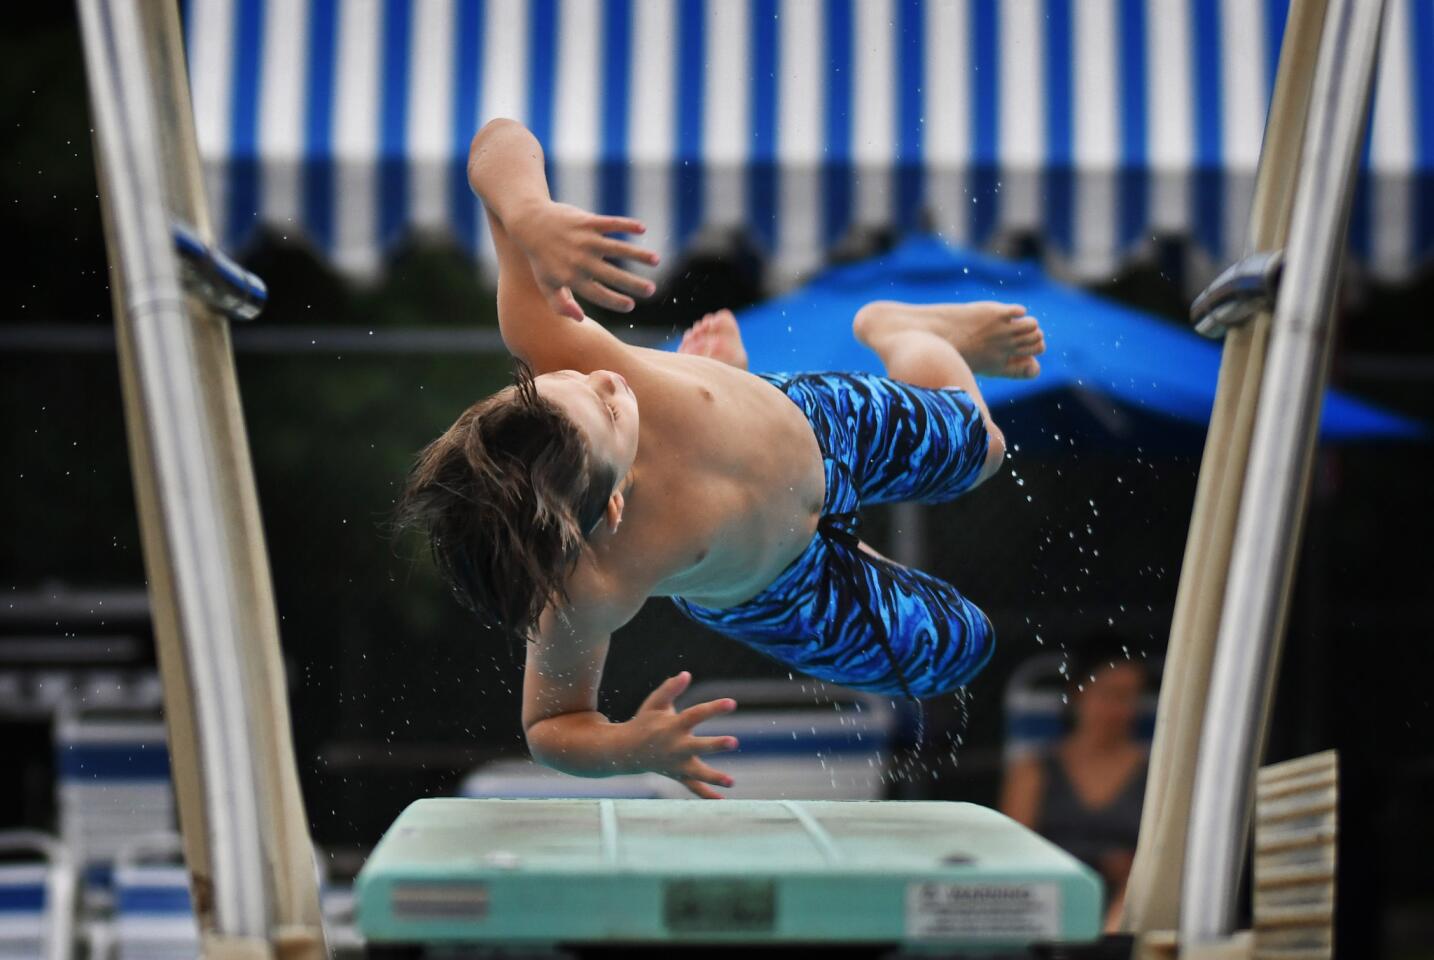 North Saint Johns' Luke McGill makes one of his dives against West Howard in youth diving competition.